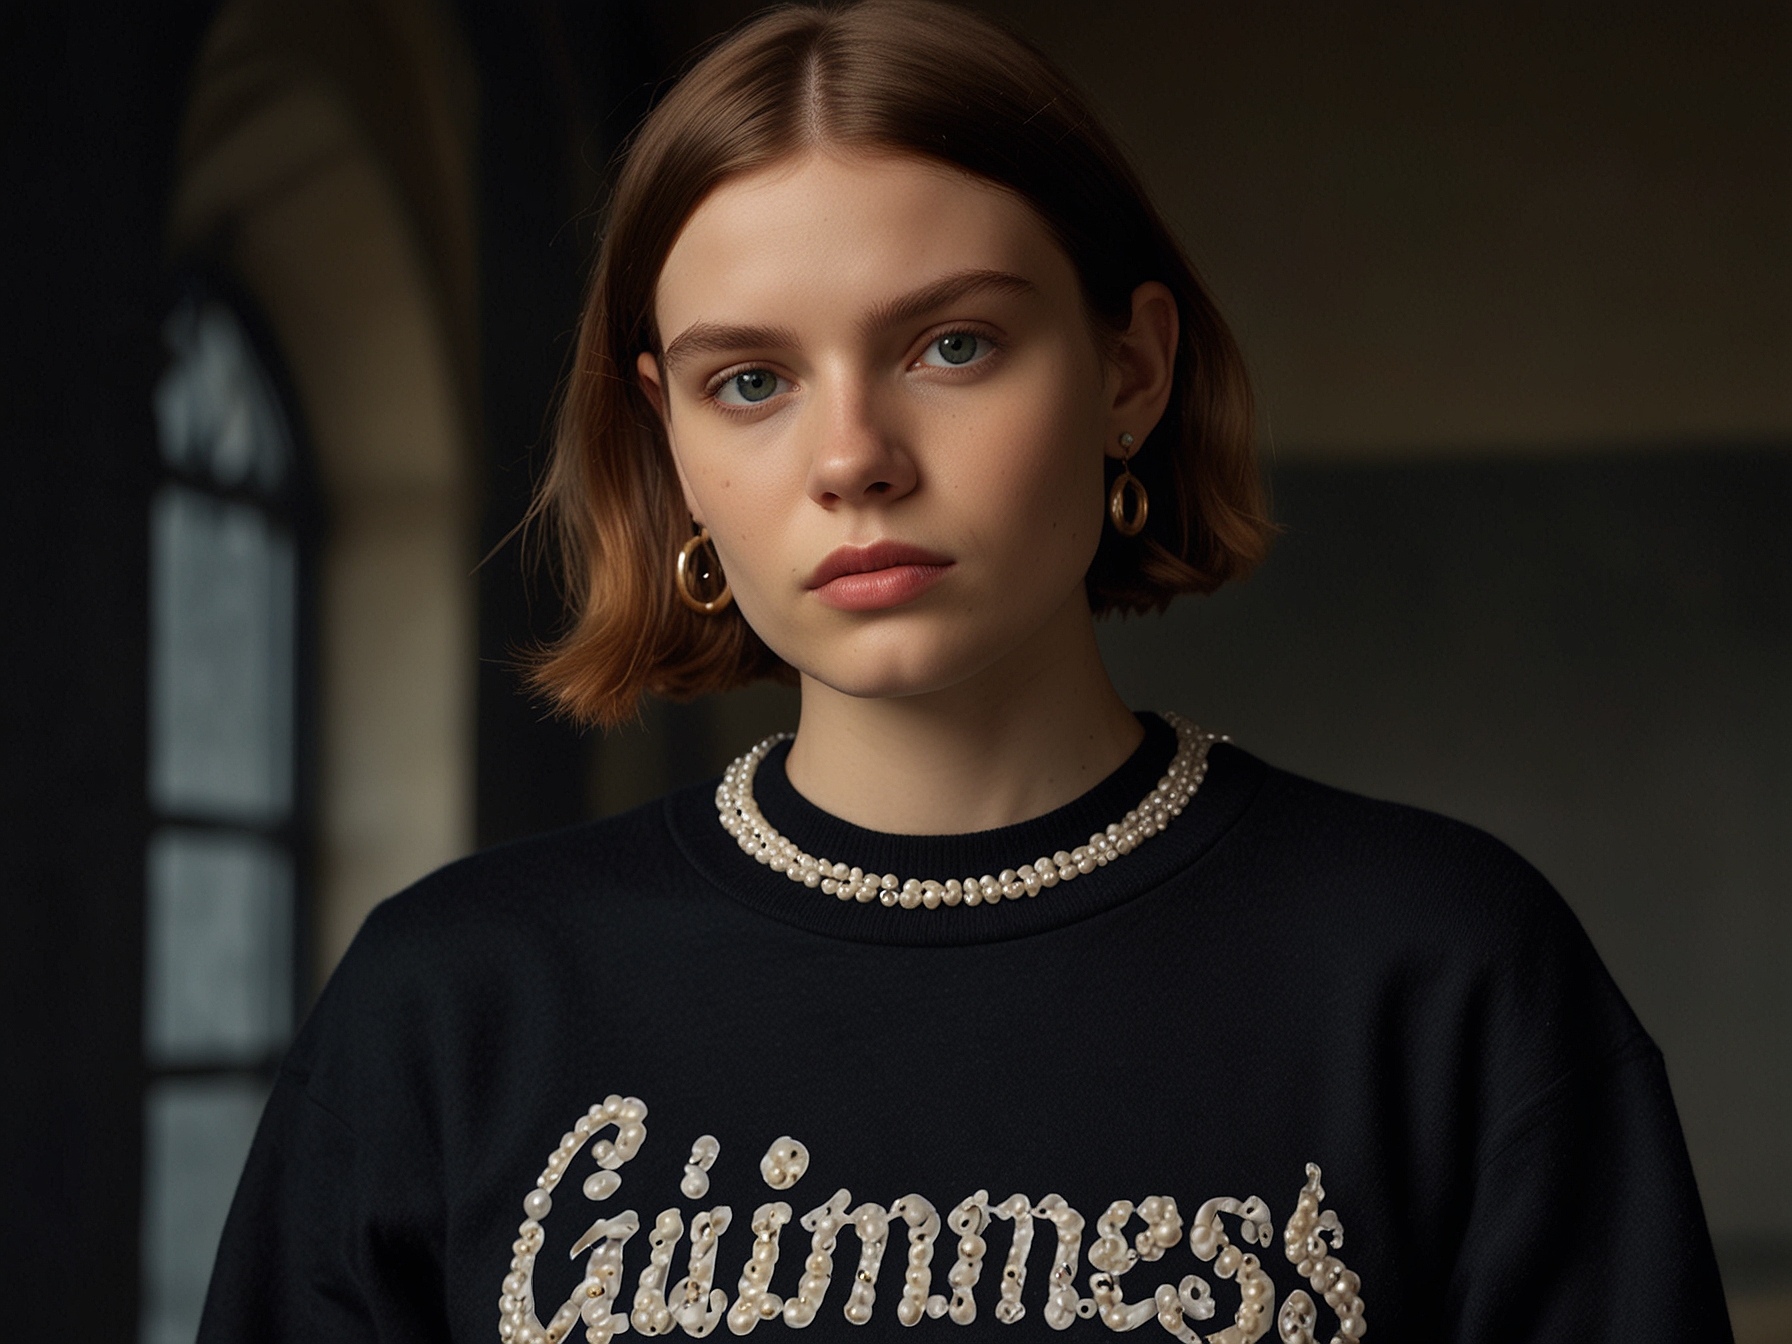 The pearled crewneck from the JW Anderson x Guinness collection, featuring elegant pearl lettering and archival Guinness graphics, exemplifying the collaboration's blend of high fashion and vintage charm.